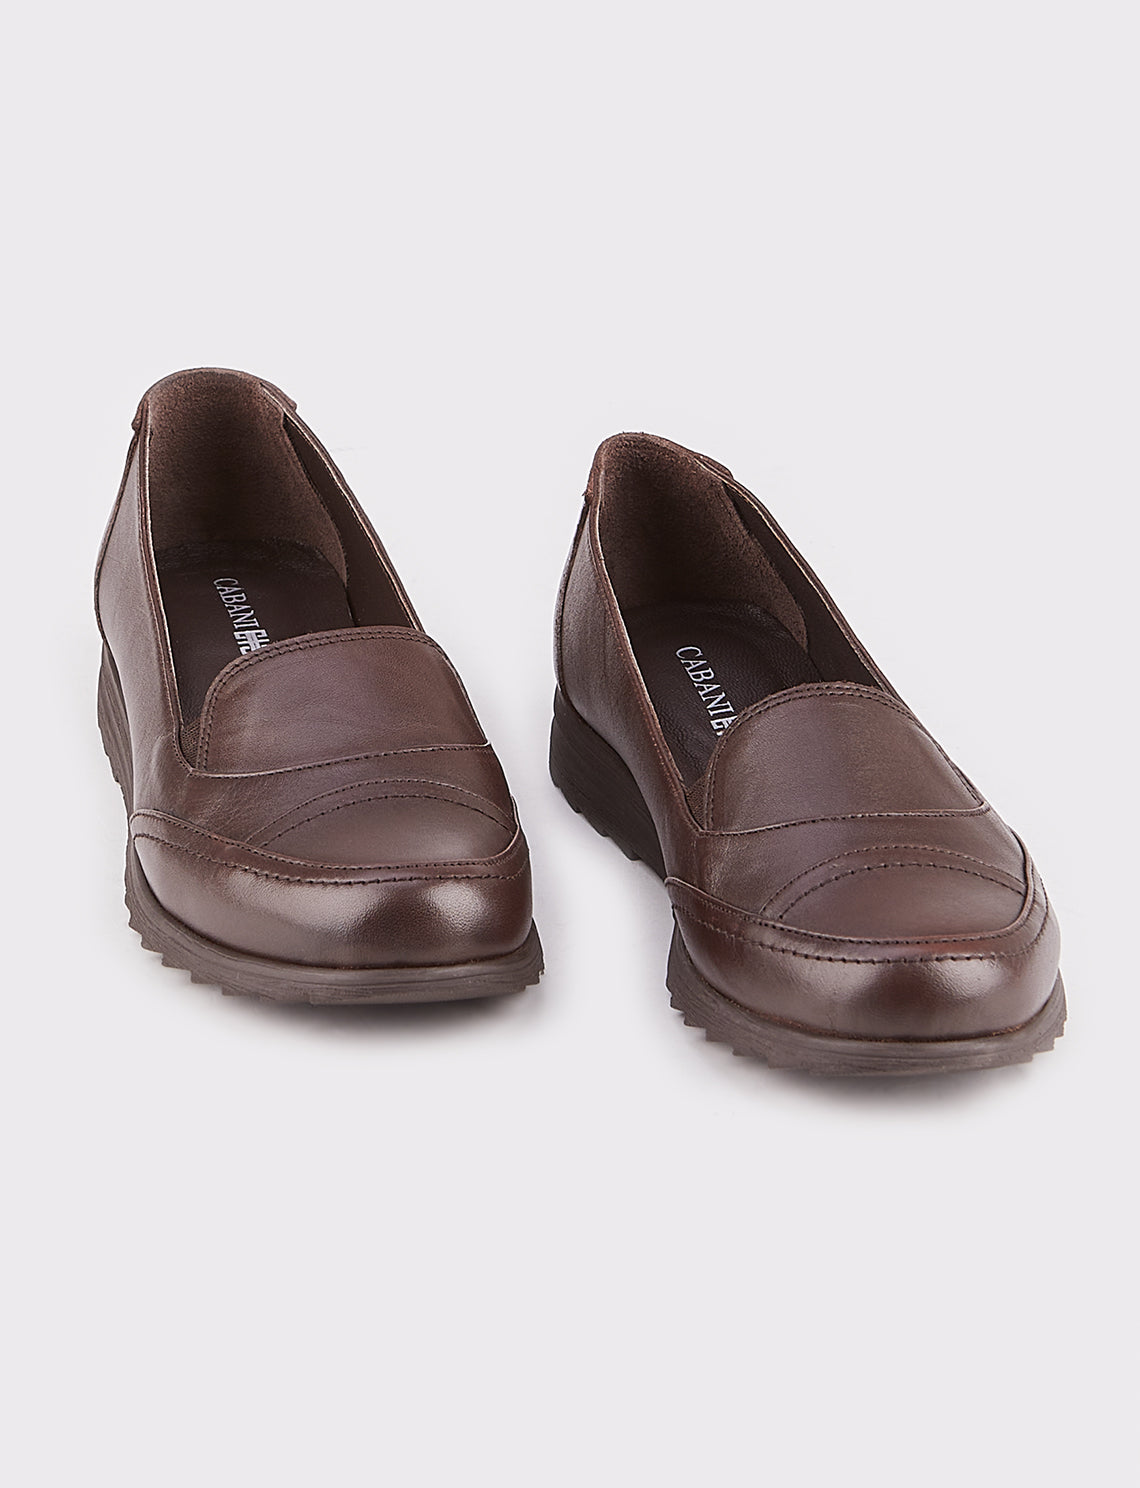 Women Brown Genuine Leather Casual Flat Shoes